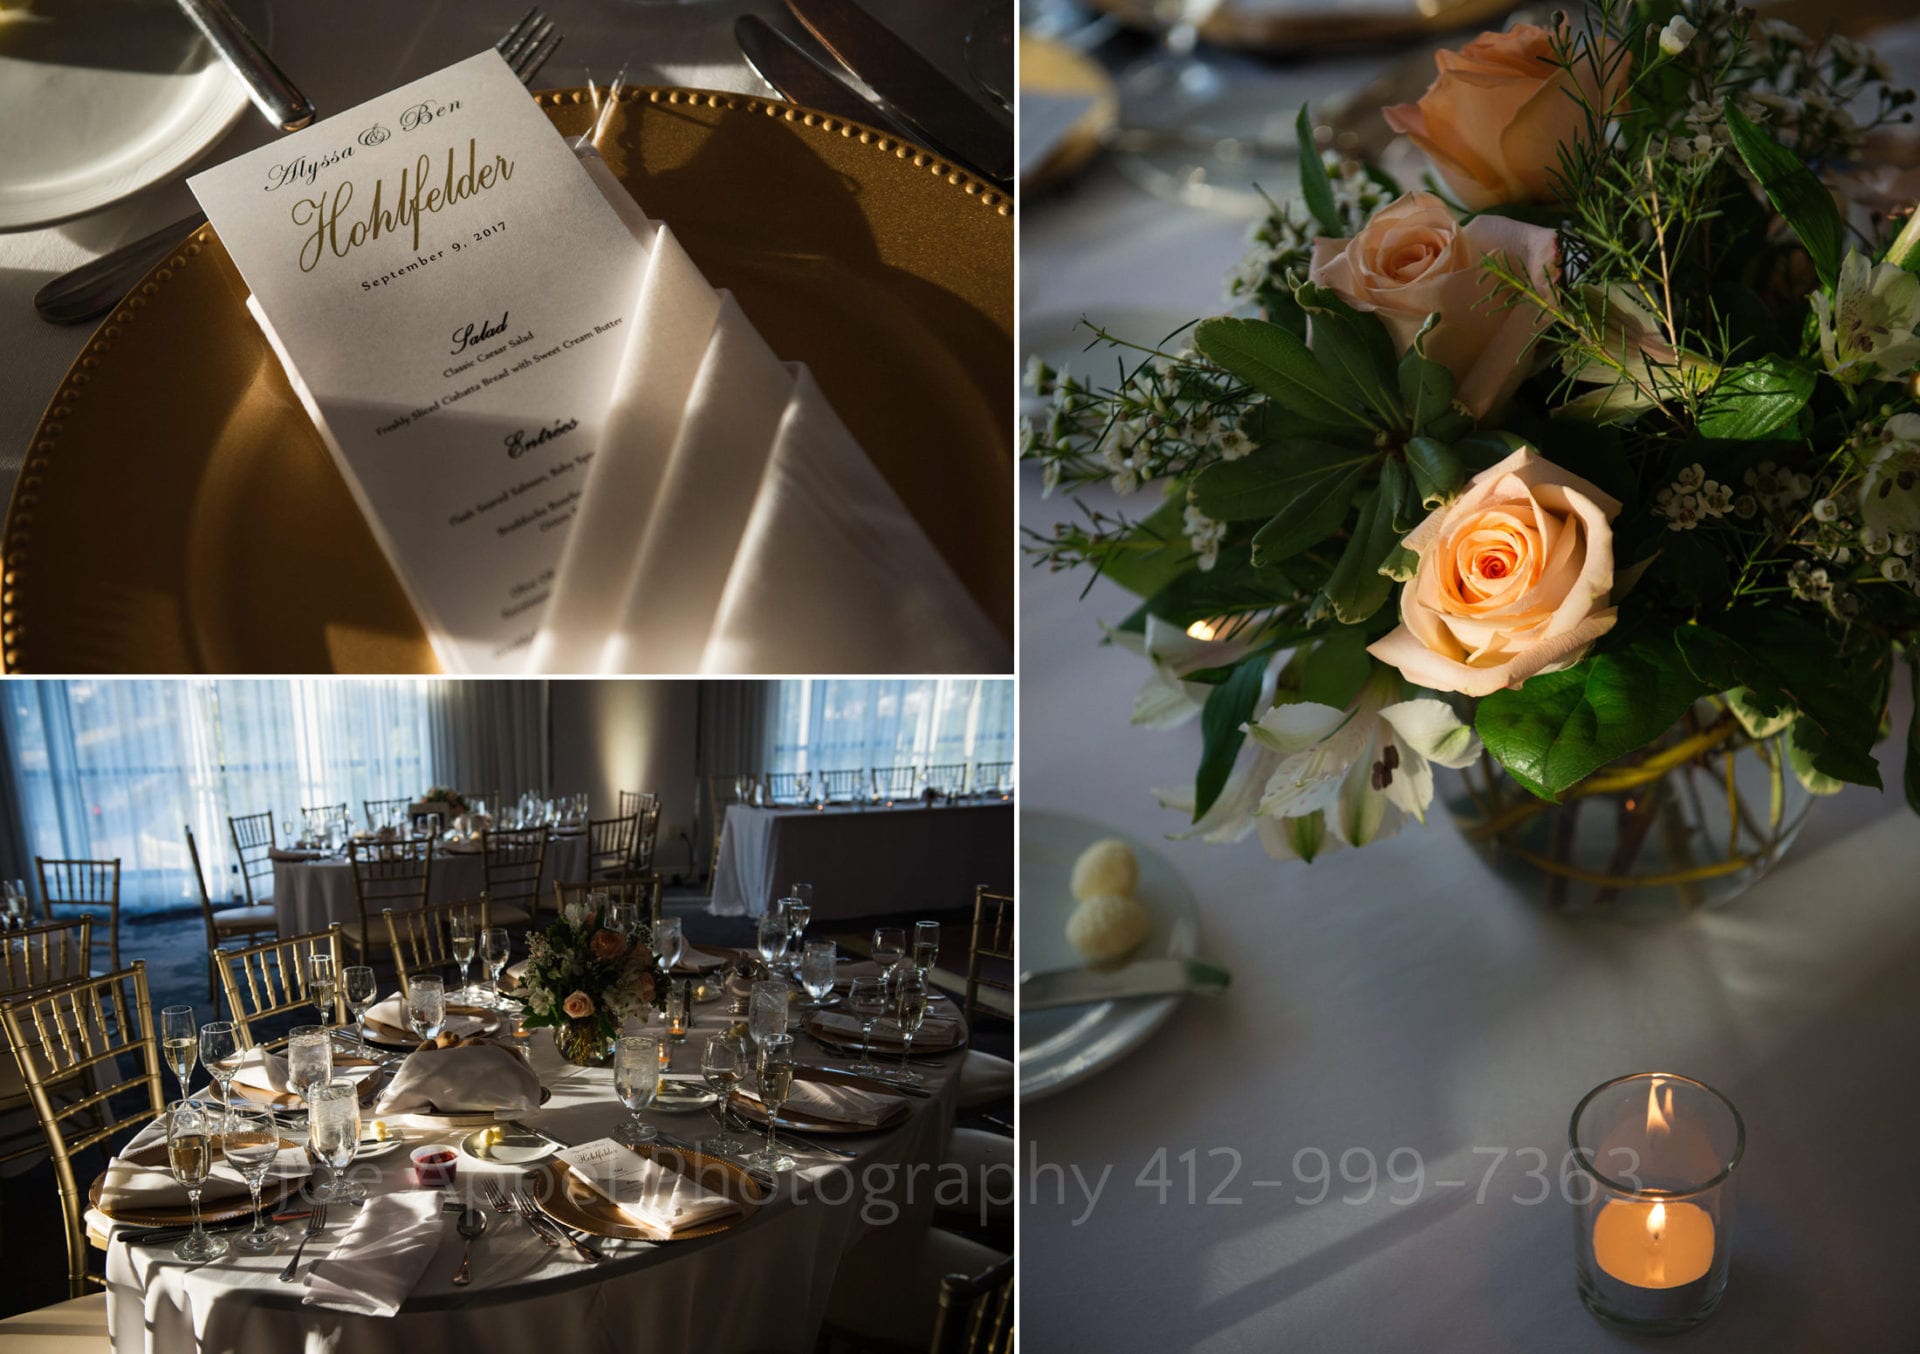 gold plates with menus next to orange roses and candles in the Symphony Ballroom during a Renaissance Pittsburgh wedding.